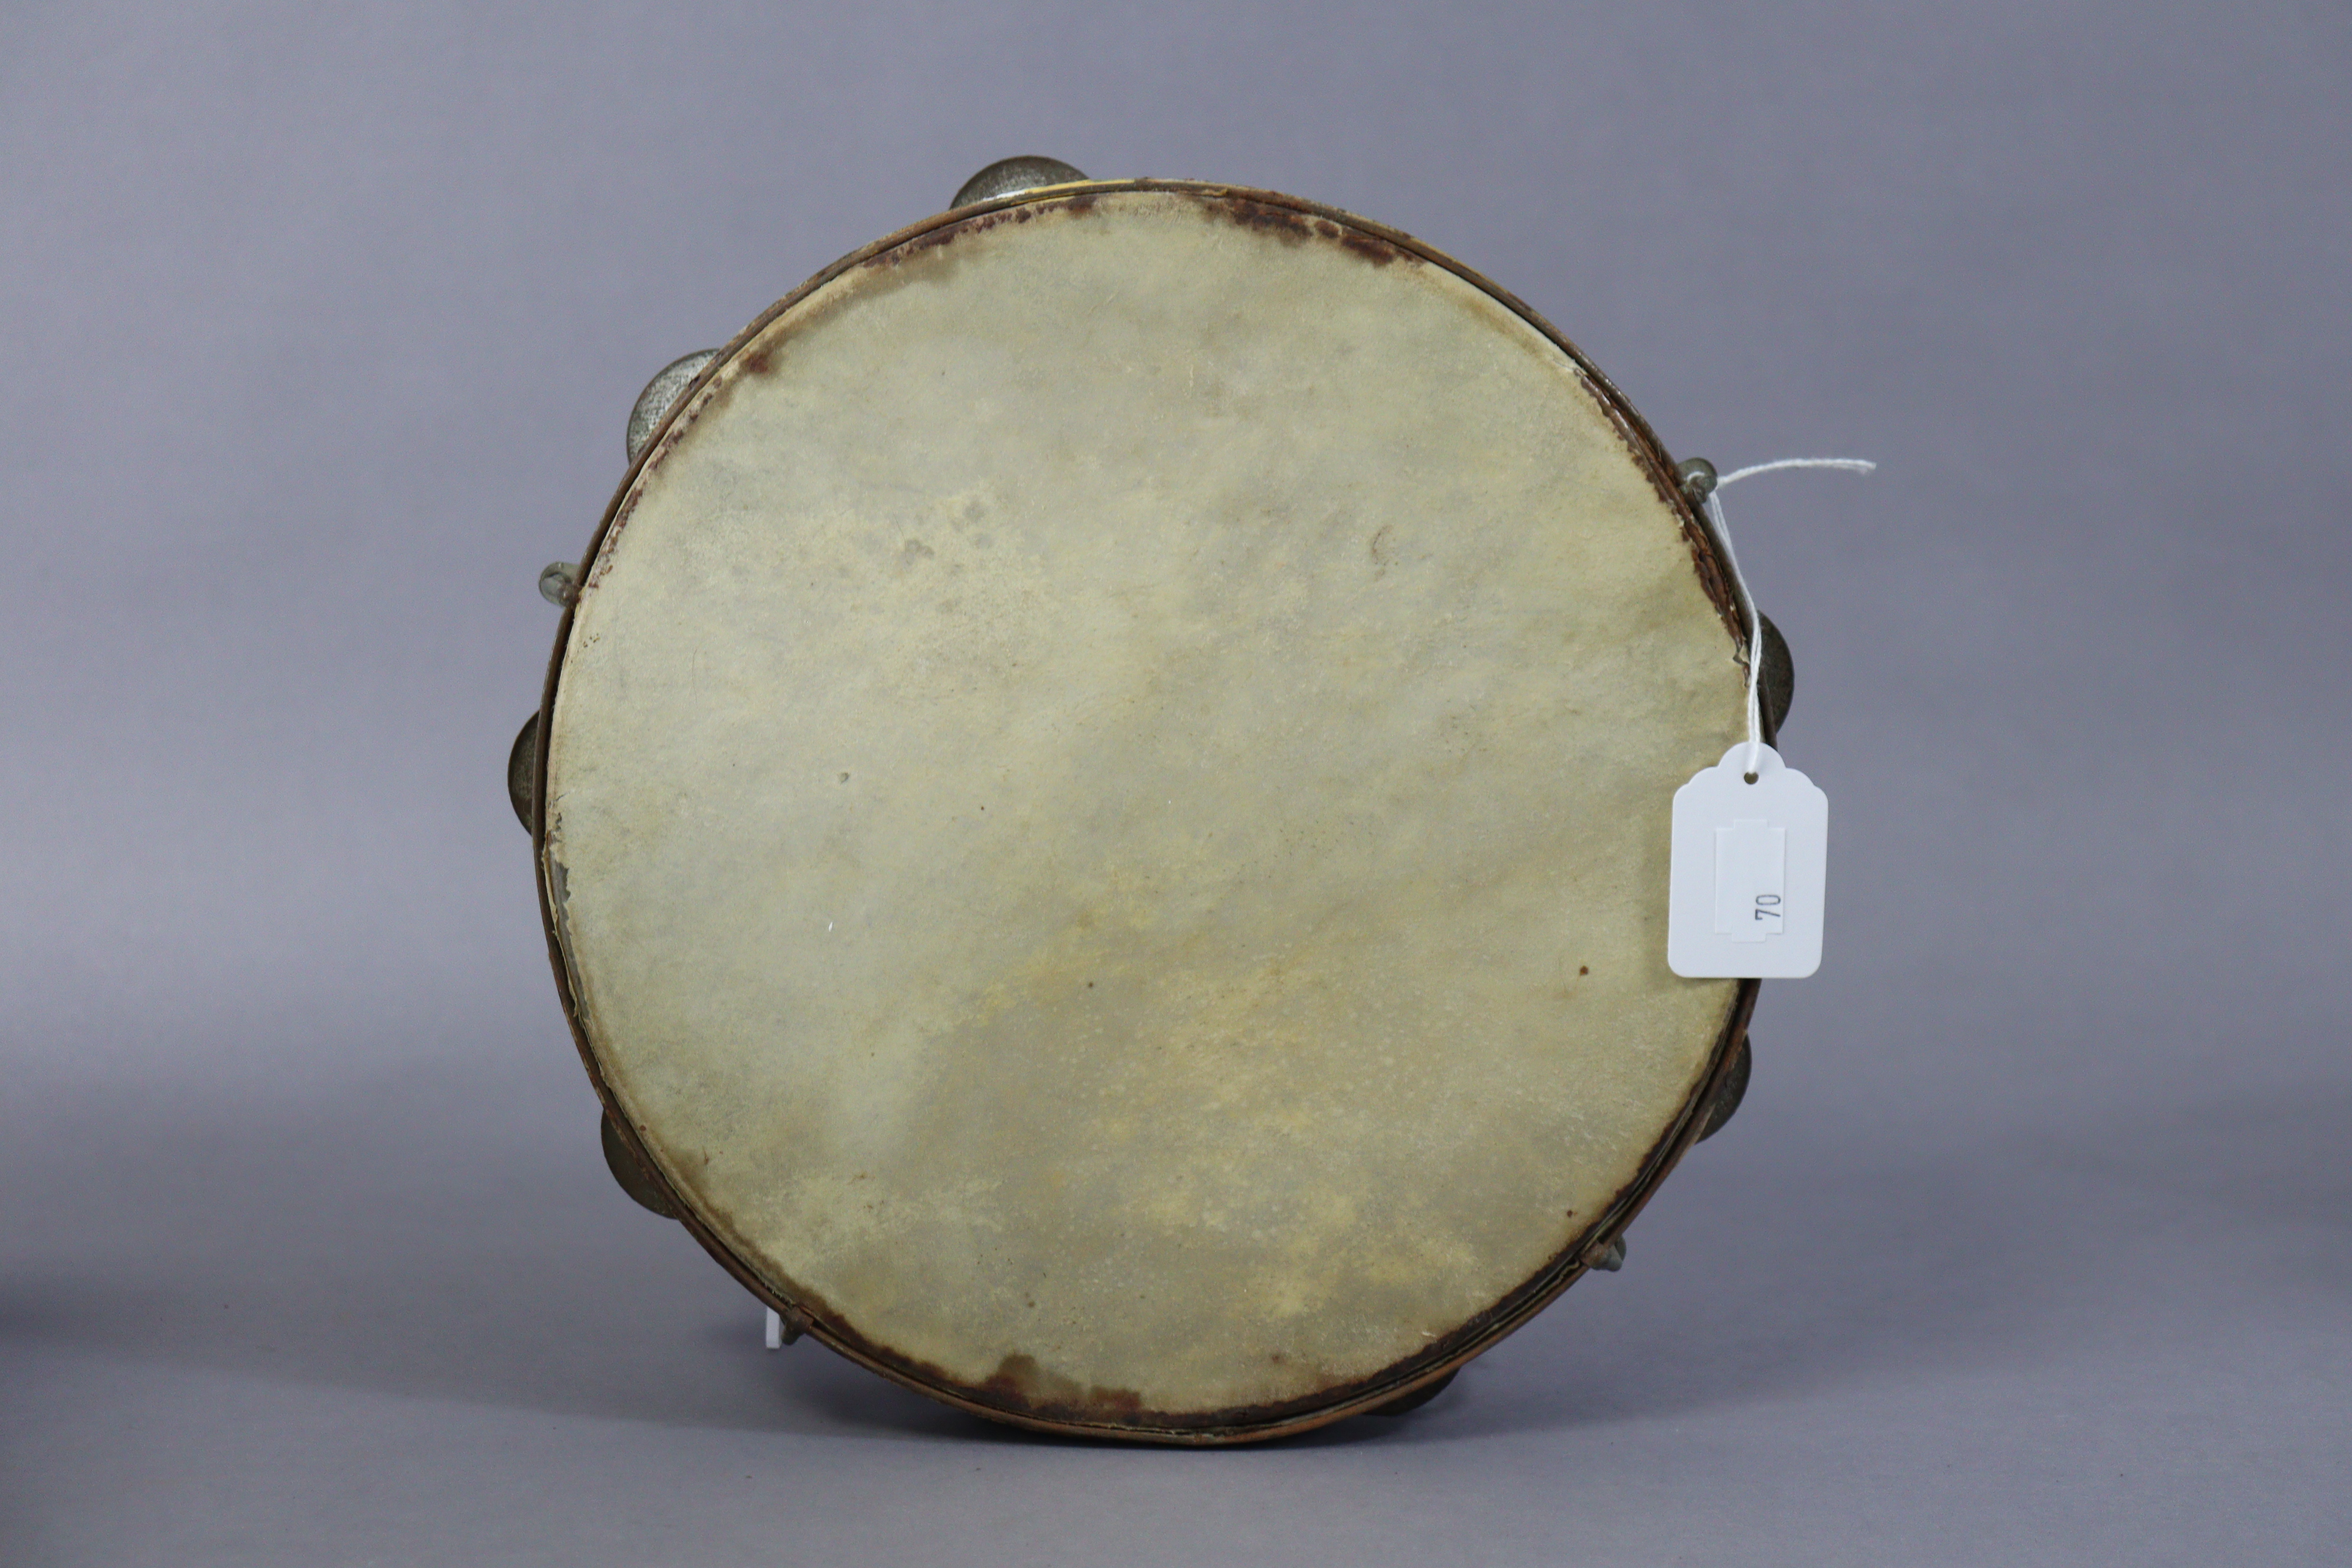 A Ridgmount portable gramophone in a cream finish fibre-covered case; together with a tambourine. - Image 5 of 7